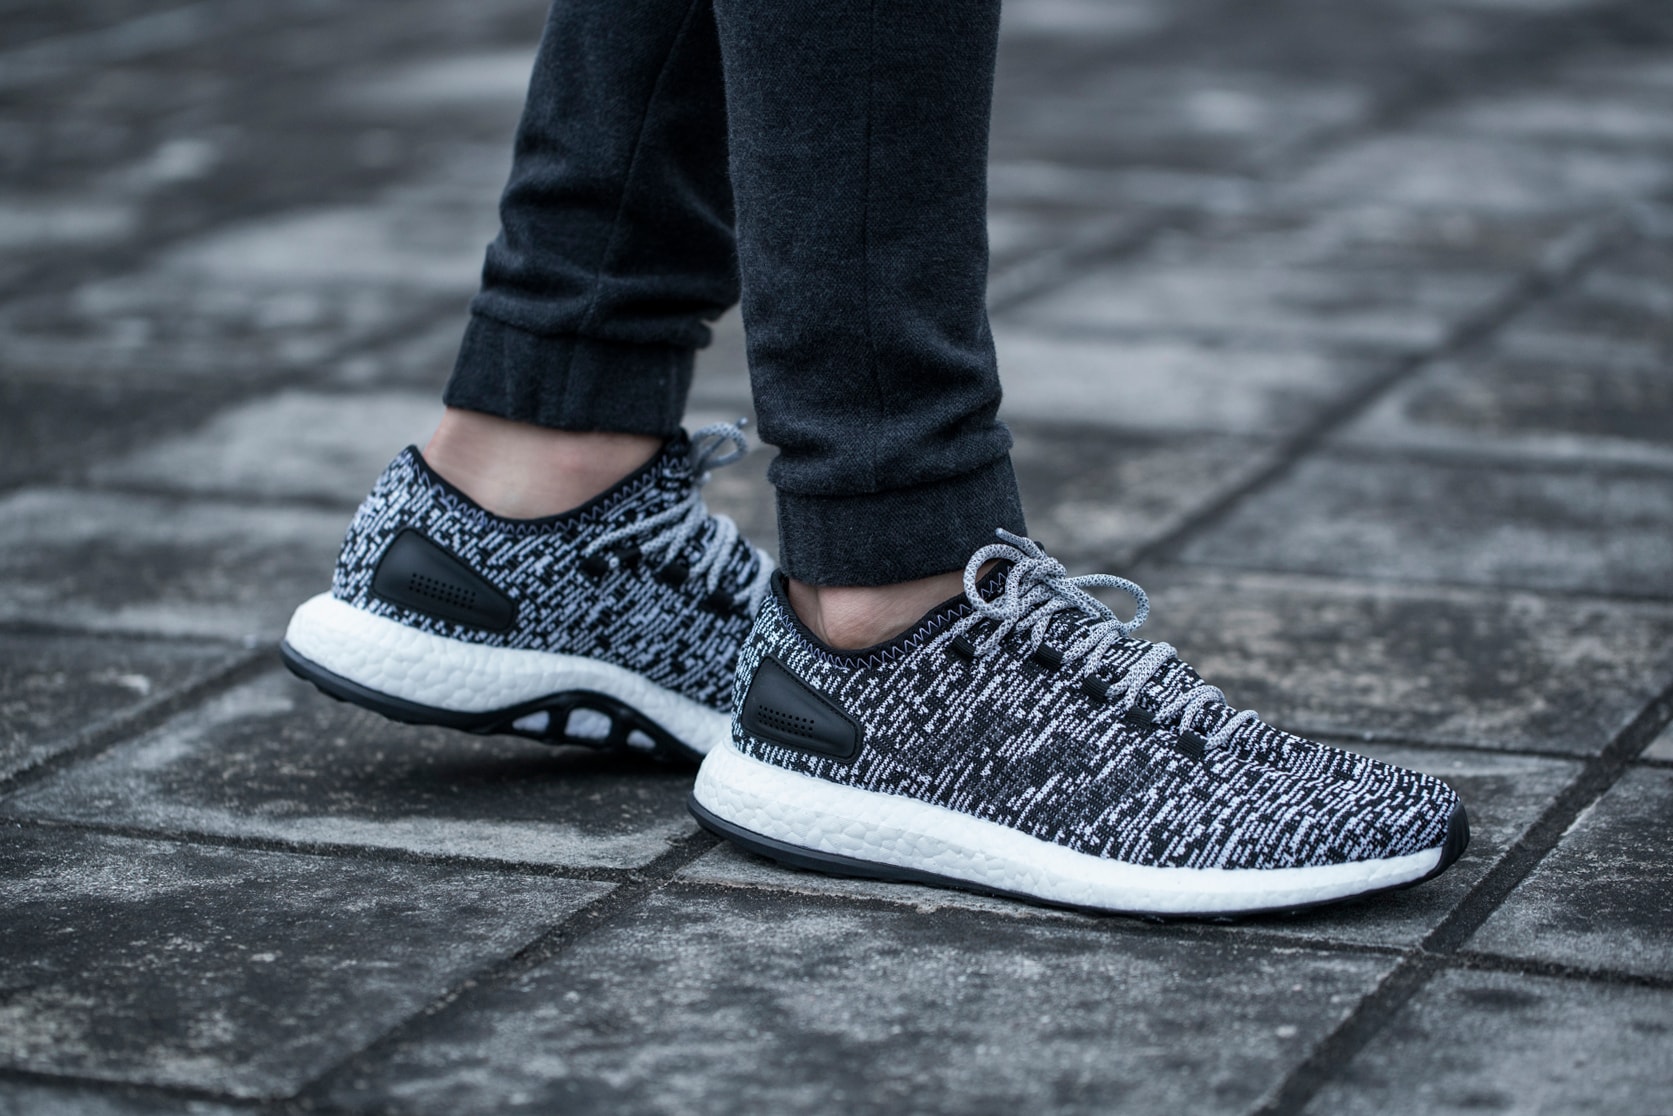 Dag reactie Giftig What Makes the New PureBOOST Different From Other BOOST Models | Hypebeast